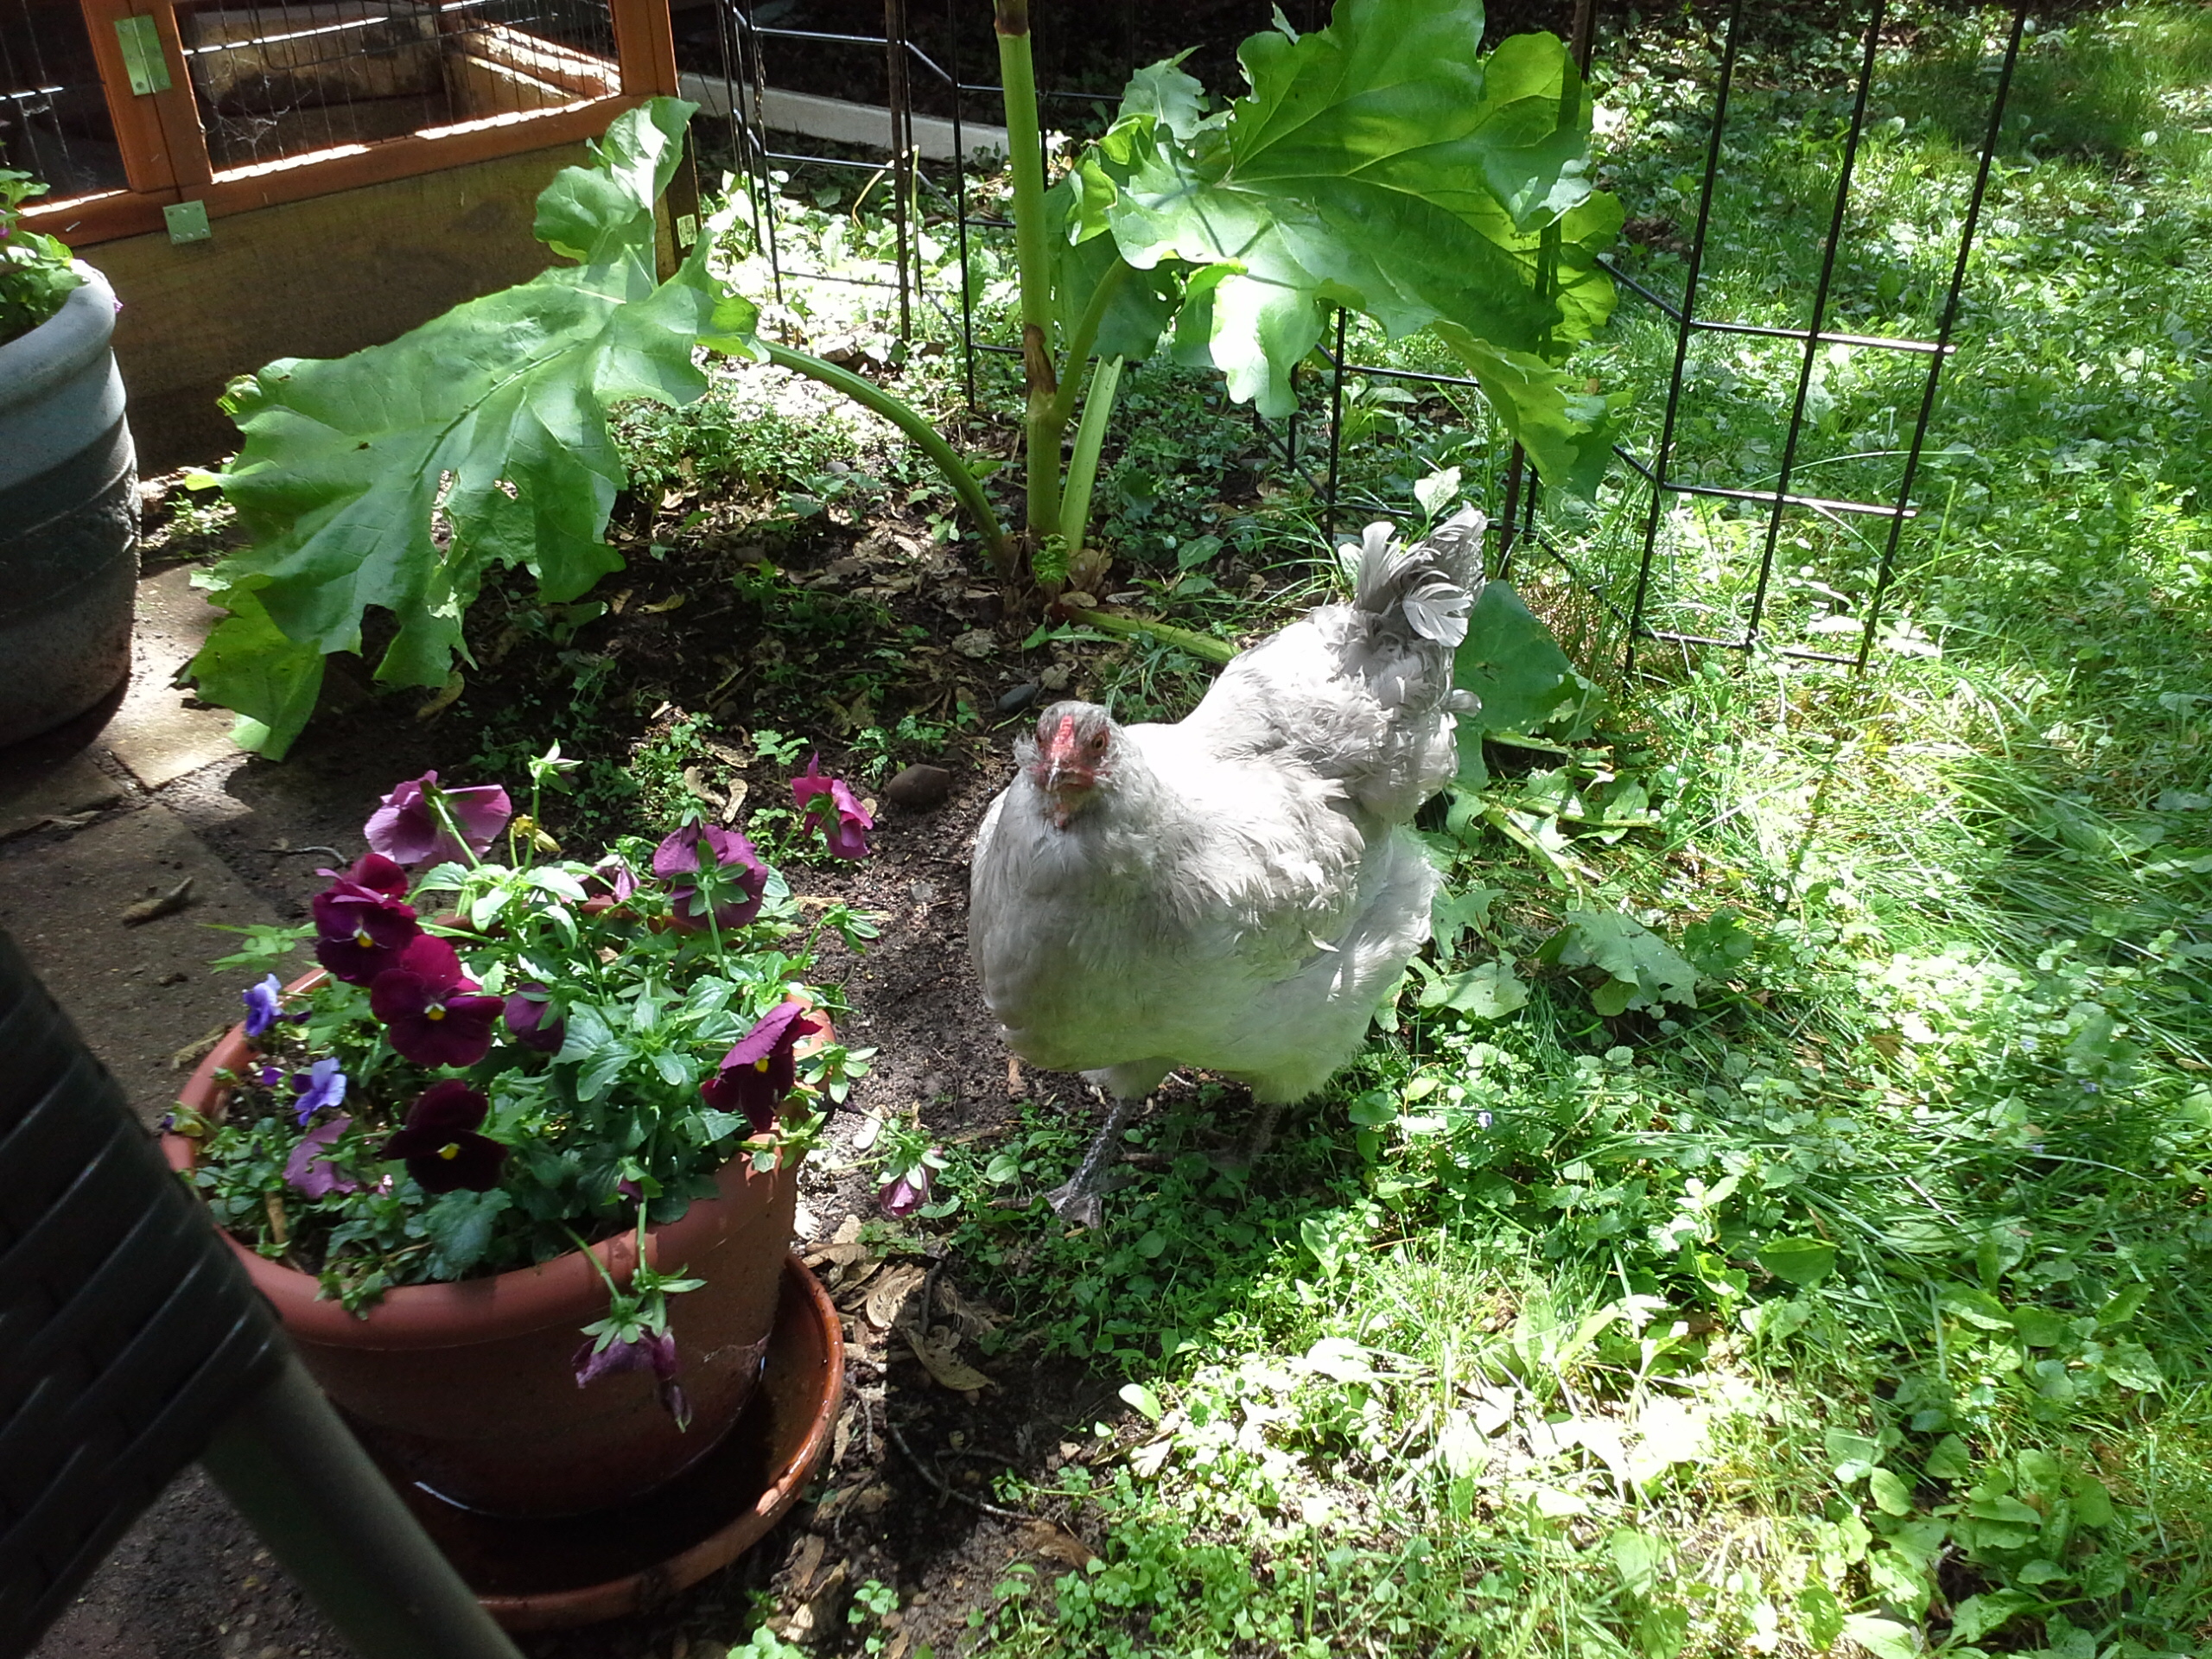 Olive, Camilla's silver chick from 2014.  the other silver chick was a rooster who got a great new rural home last fall.  i know, it's not fair that Olive is the only one of the babies who has a name....